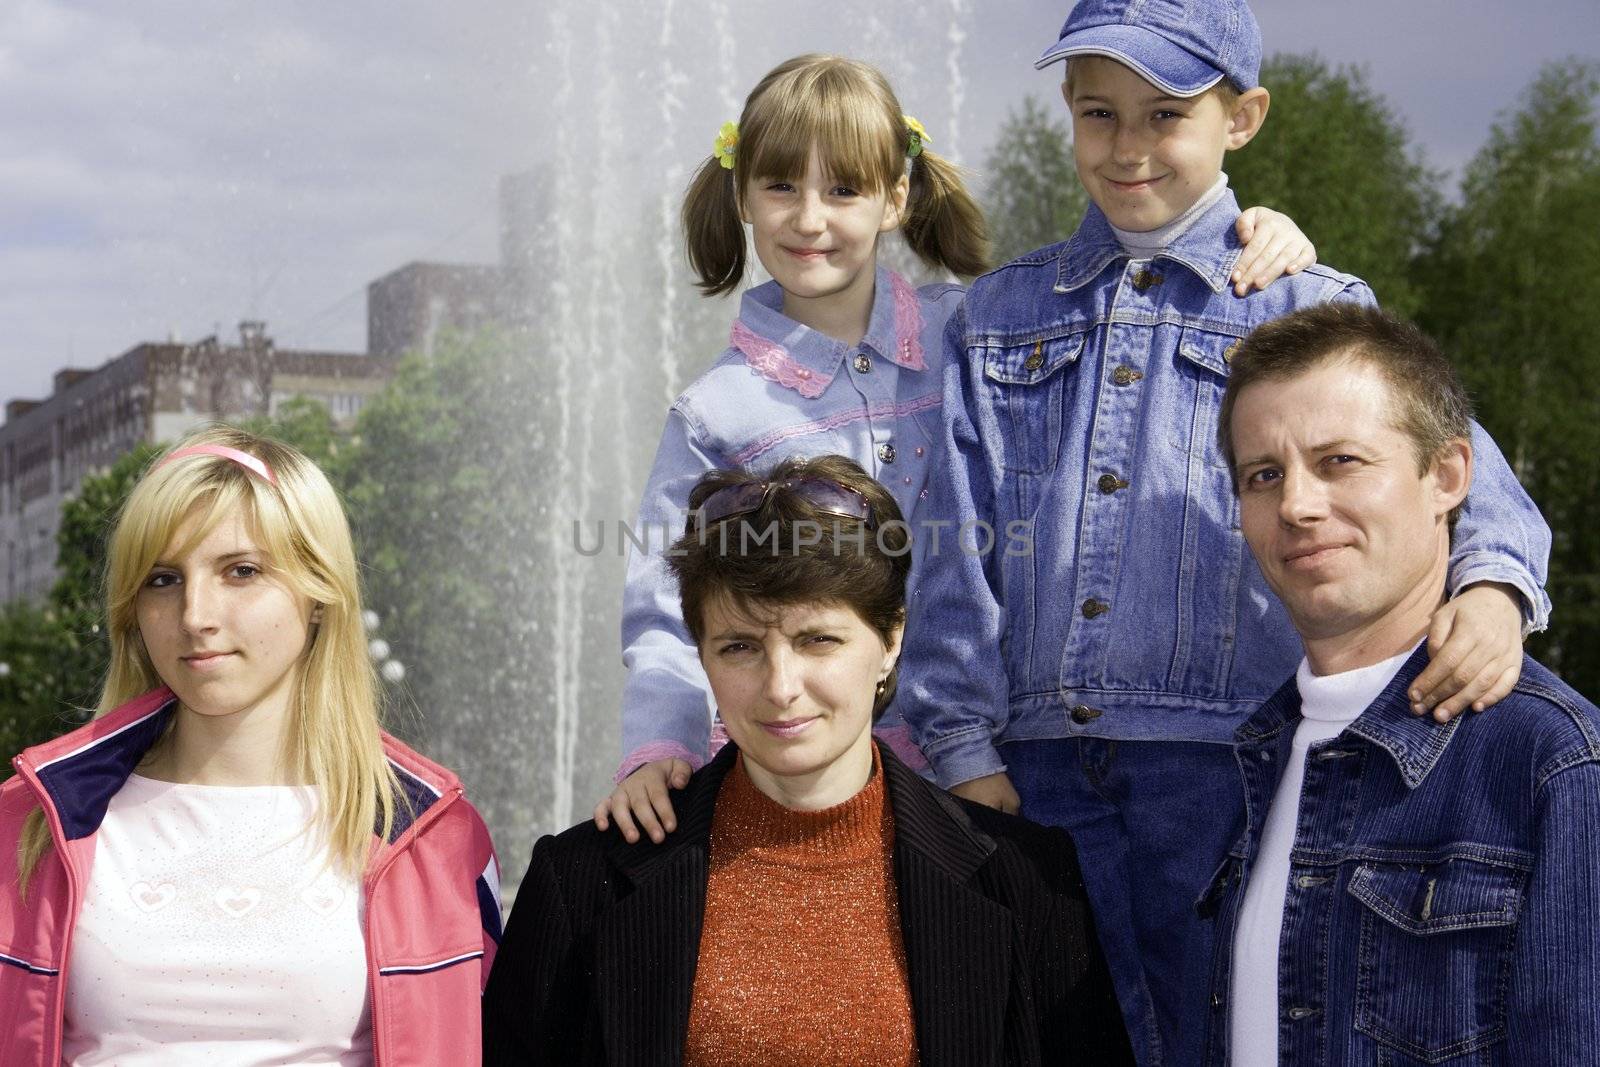 Family against a fountain and the sky with clouds